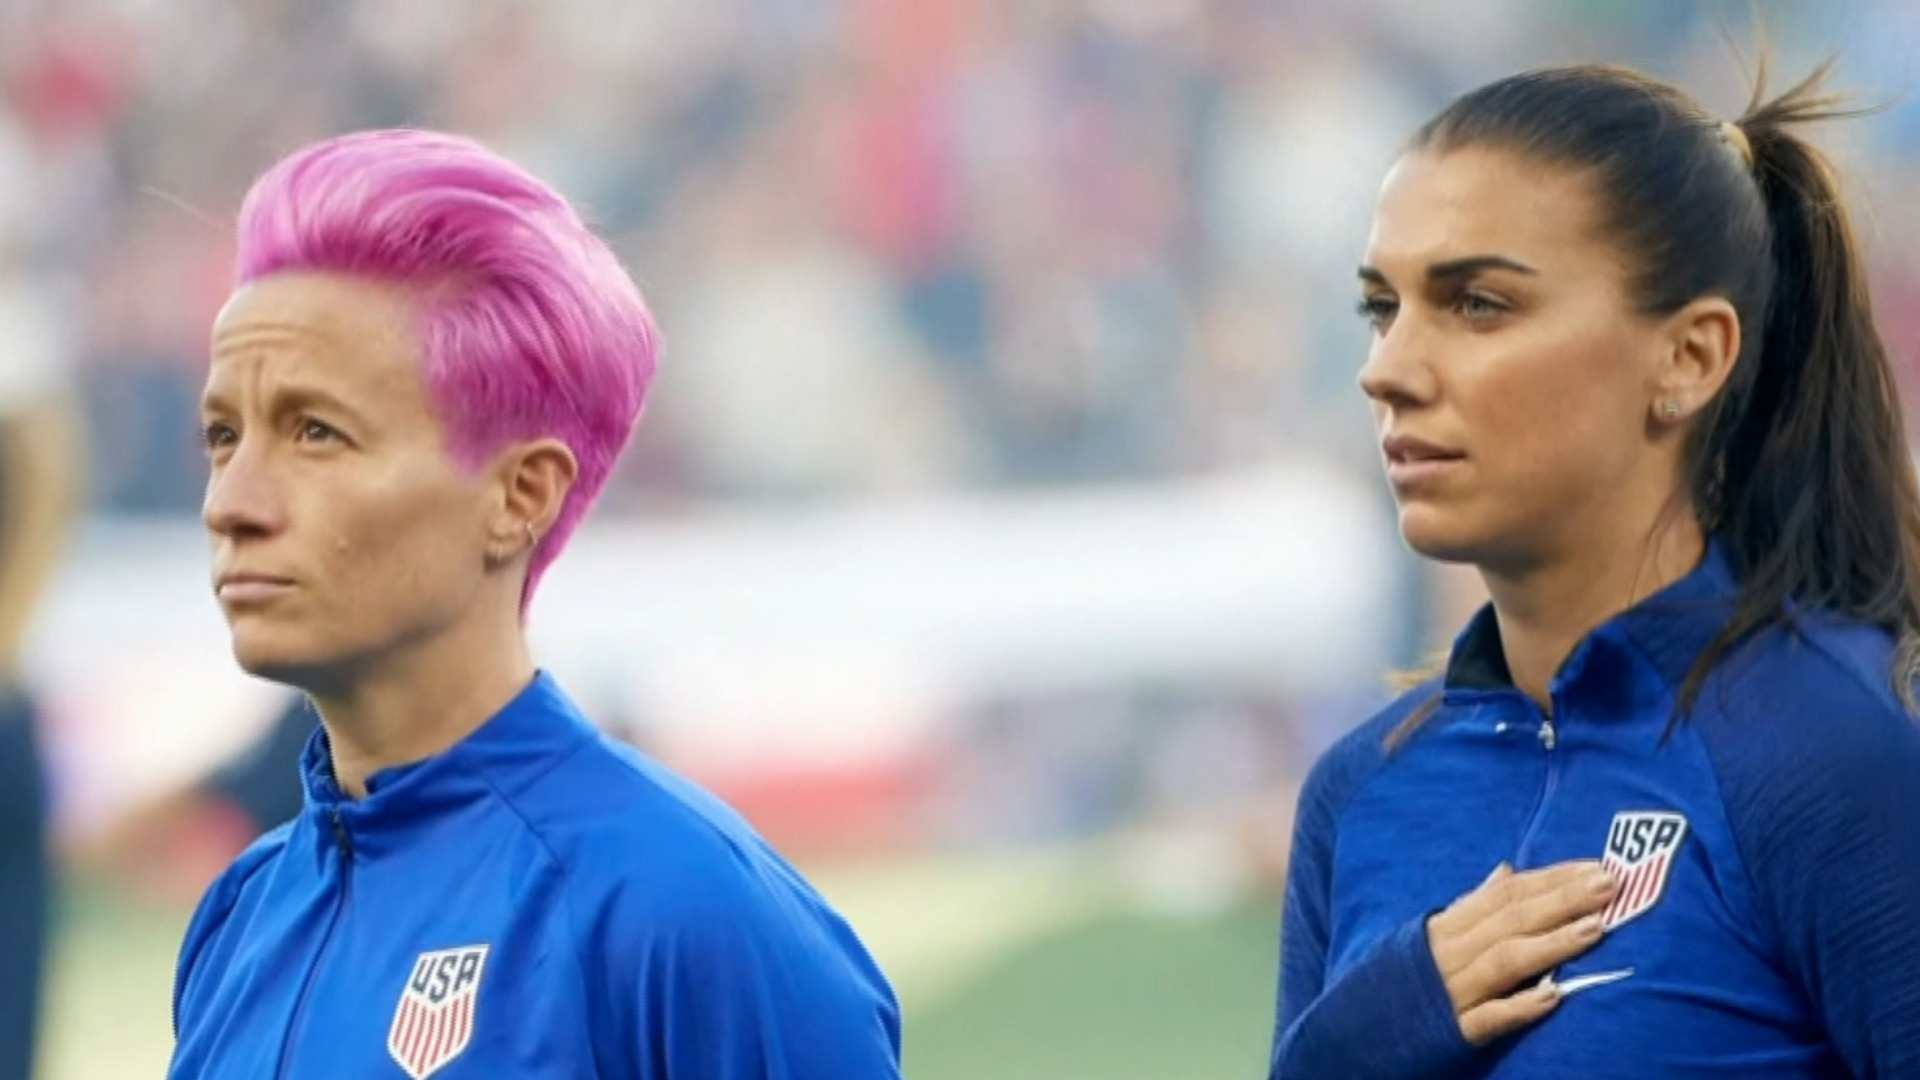 Watch Cbs Evening News U S Women S Soccer Players Settle Equal Pay Lawsuit Full Show On Cbs